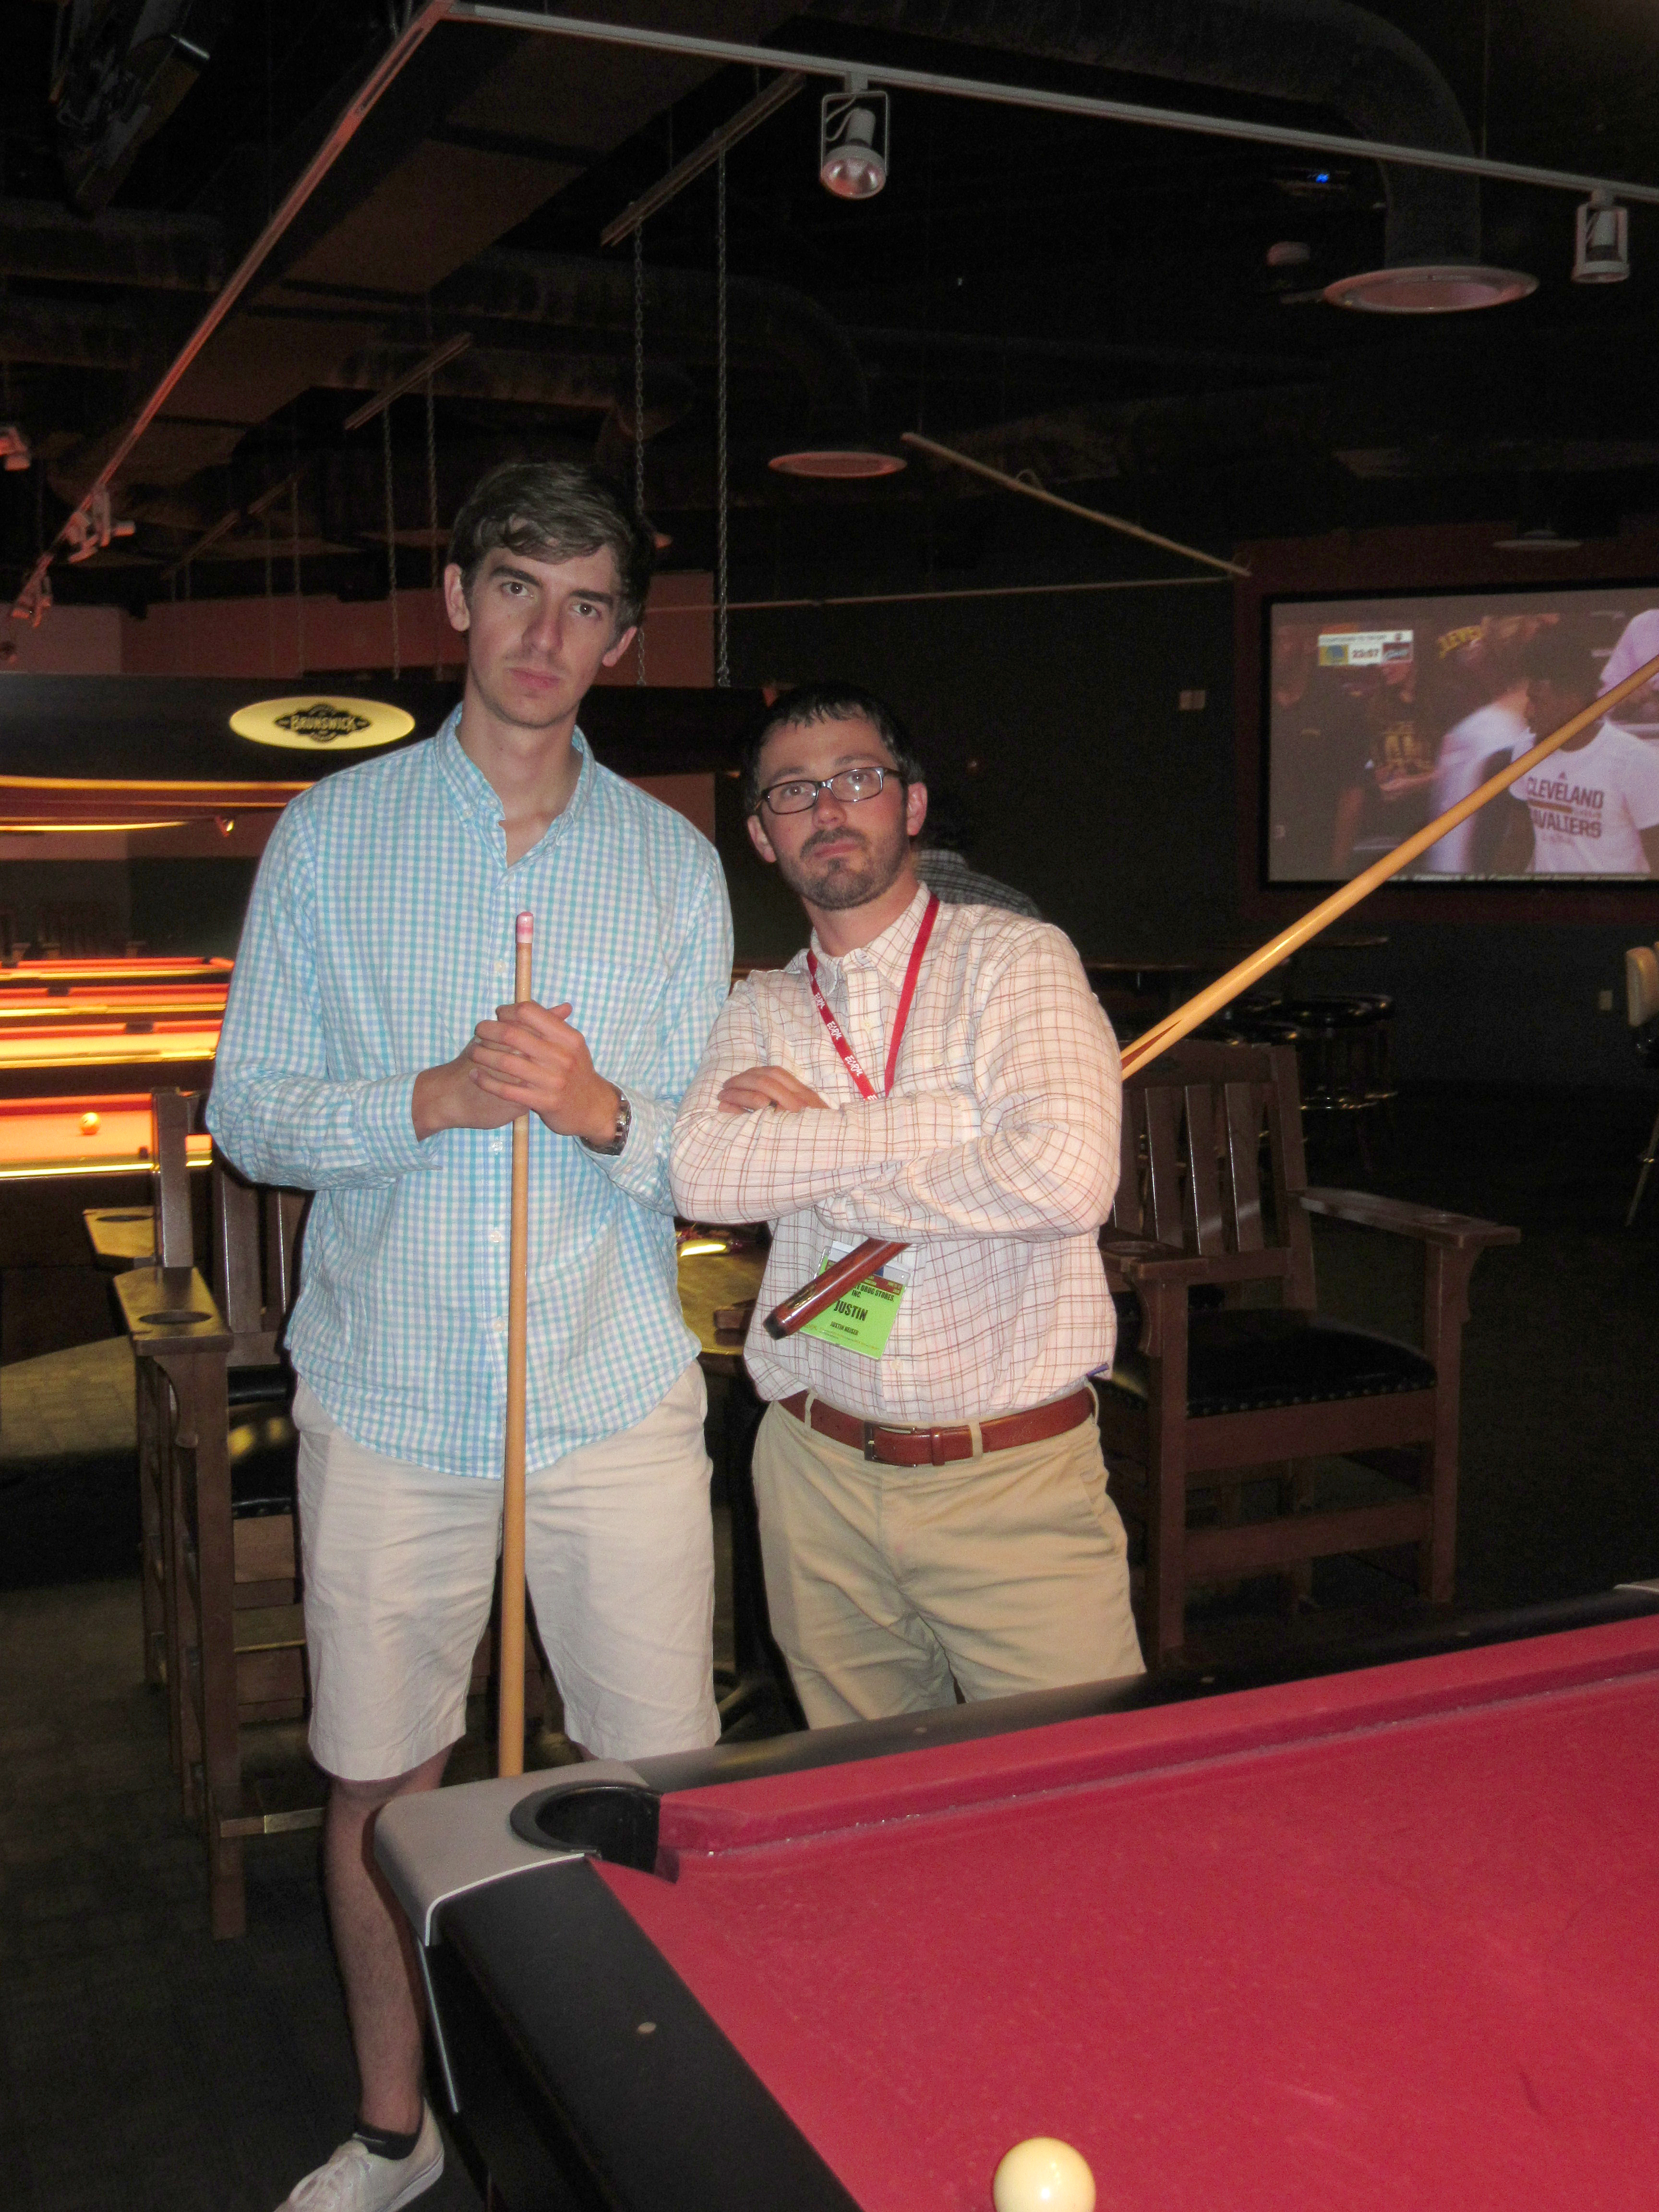 Attendees enjoyed playing some pool during an evening event.